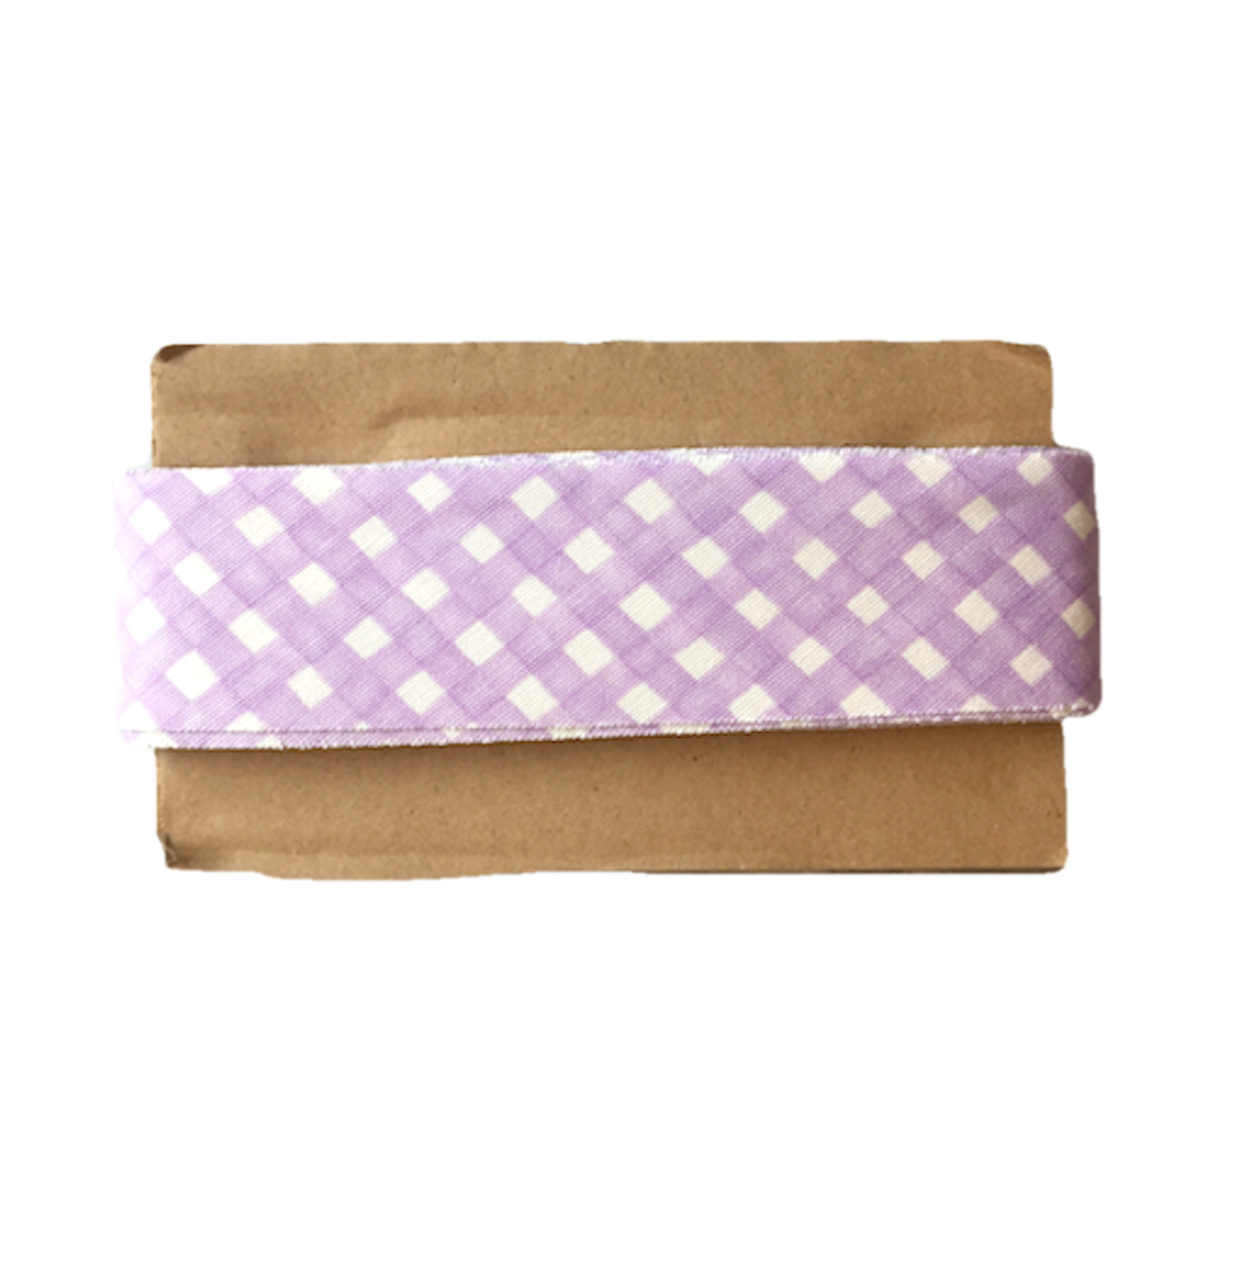 Lavender Gingham 100% Cotton Fabric 1 1/2" Wide Unfolded Bias Binding  8 Yards